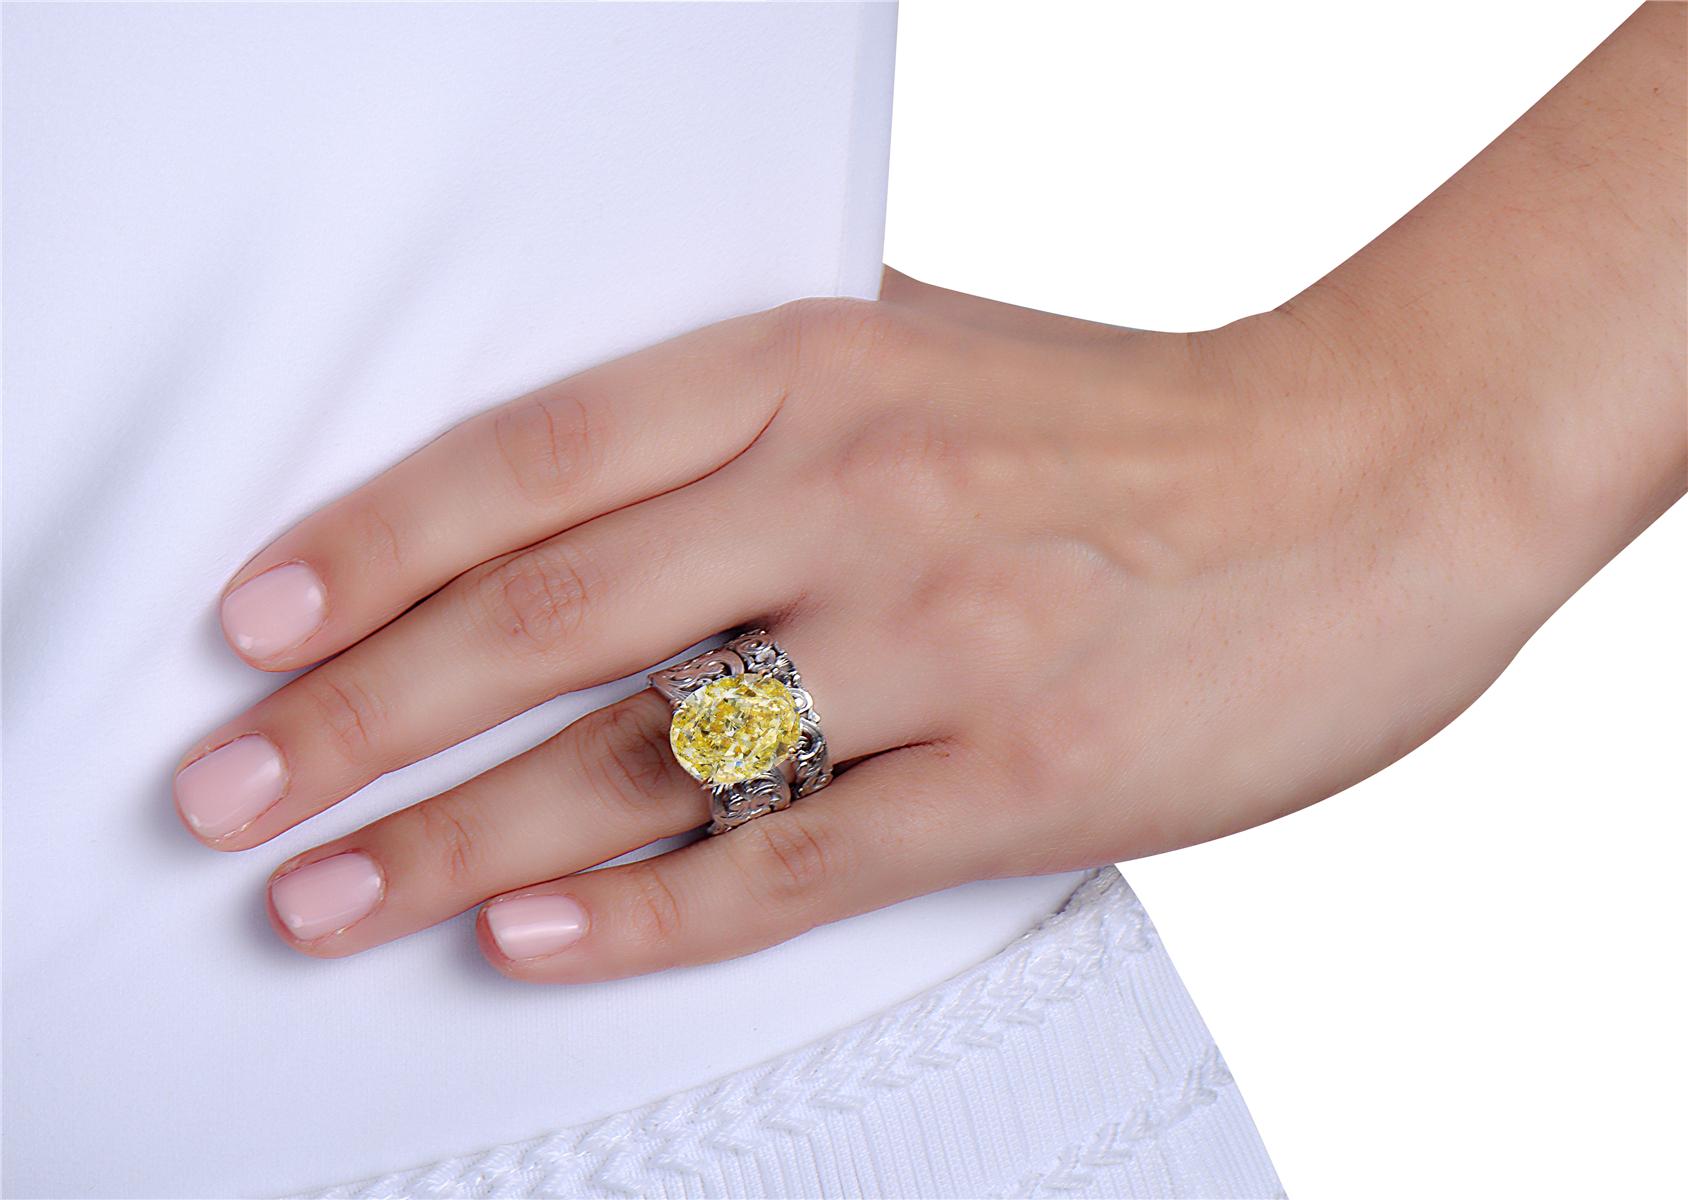 Women's 13.11 Carat Oval Fancy Yellow GIA Certified Diamond Engagement Ring and Band